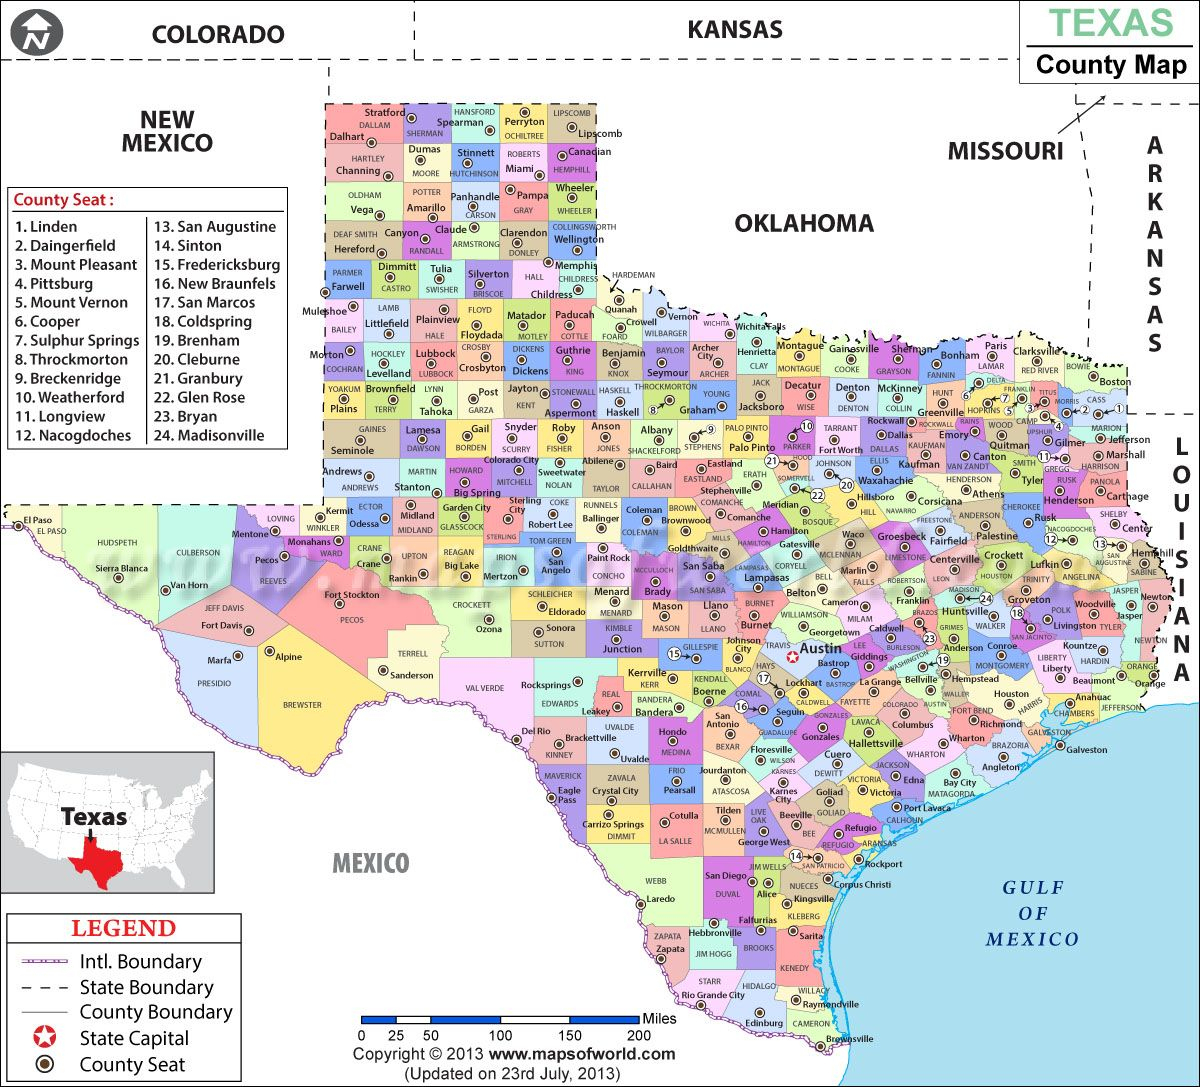 Texas County Map - Thought It Would Be Fun To Do The Texas County - Seminole Texas Map